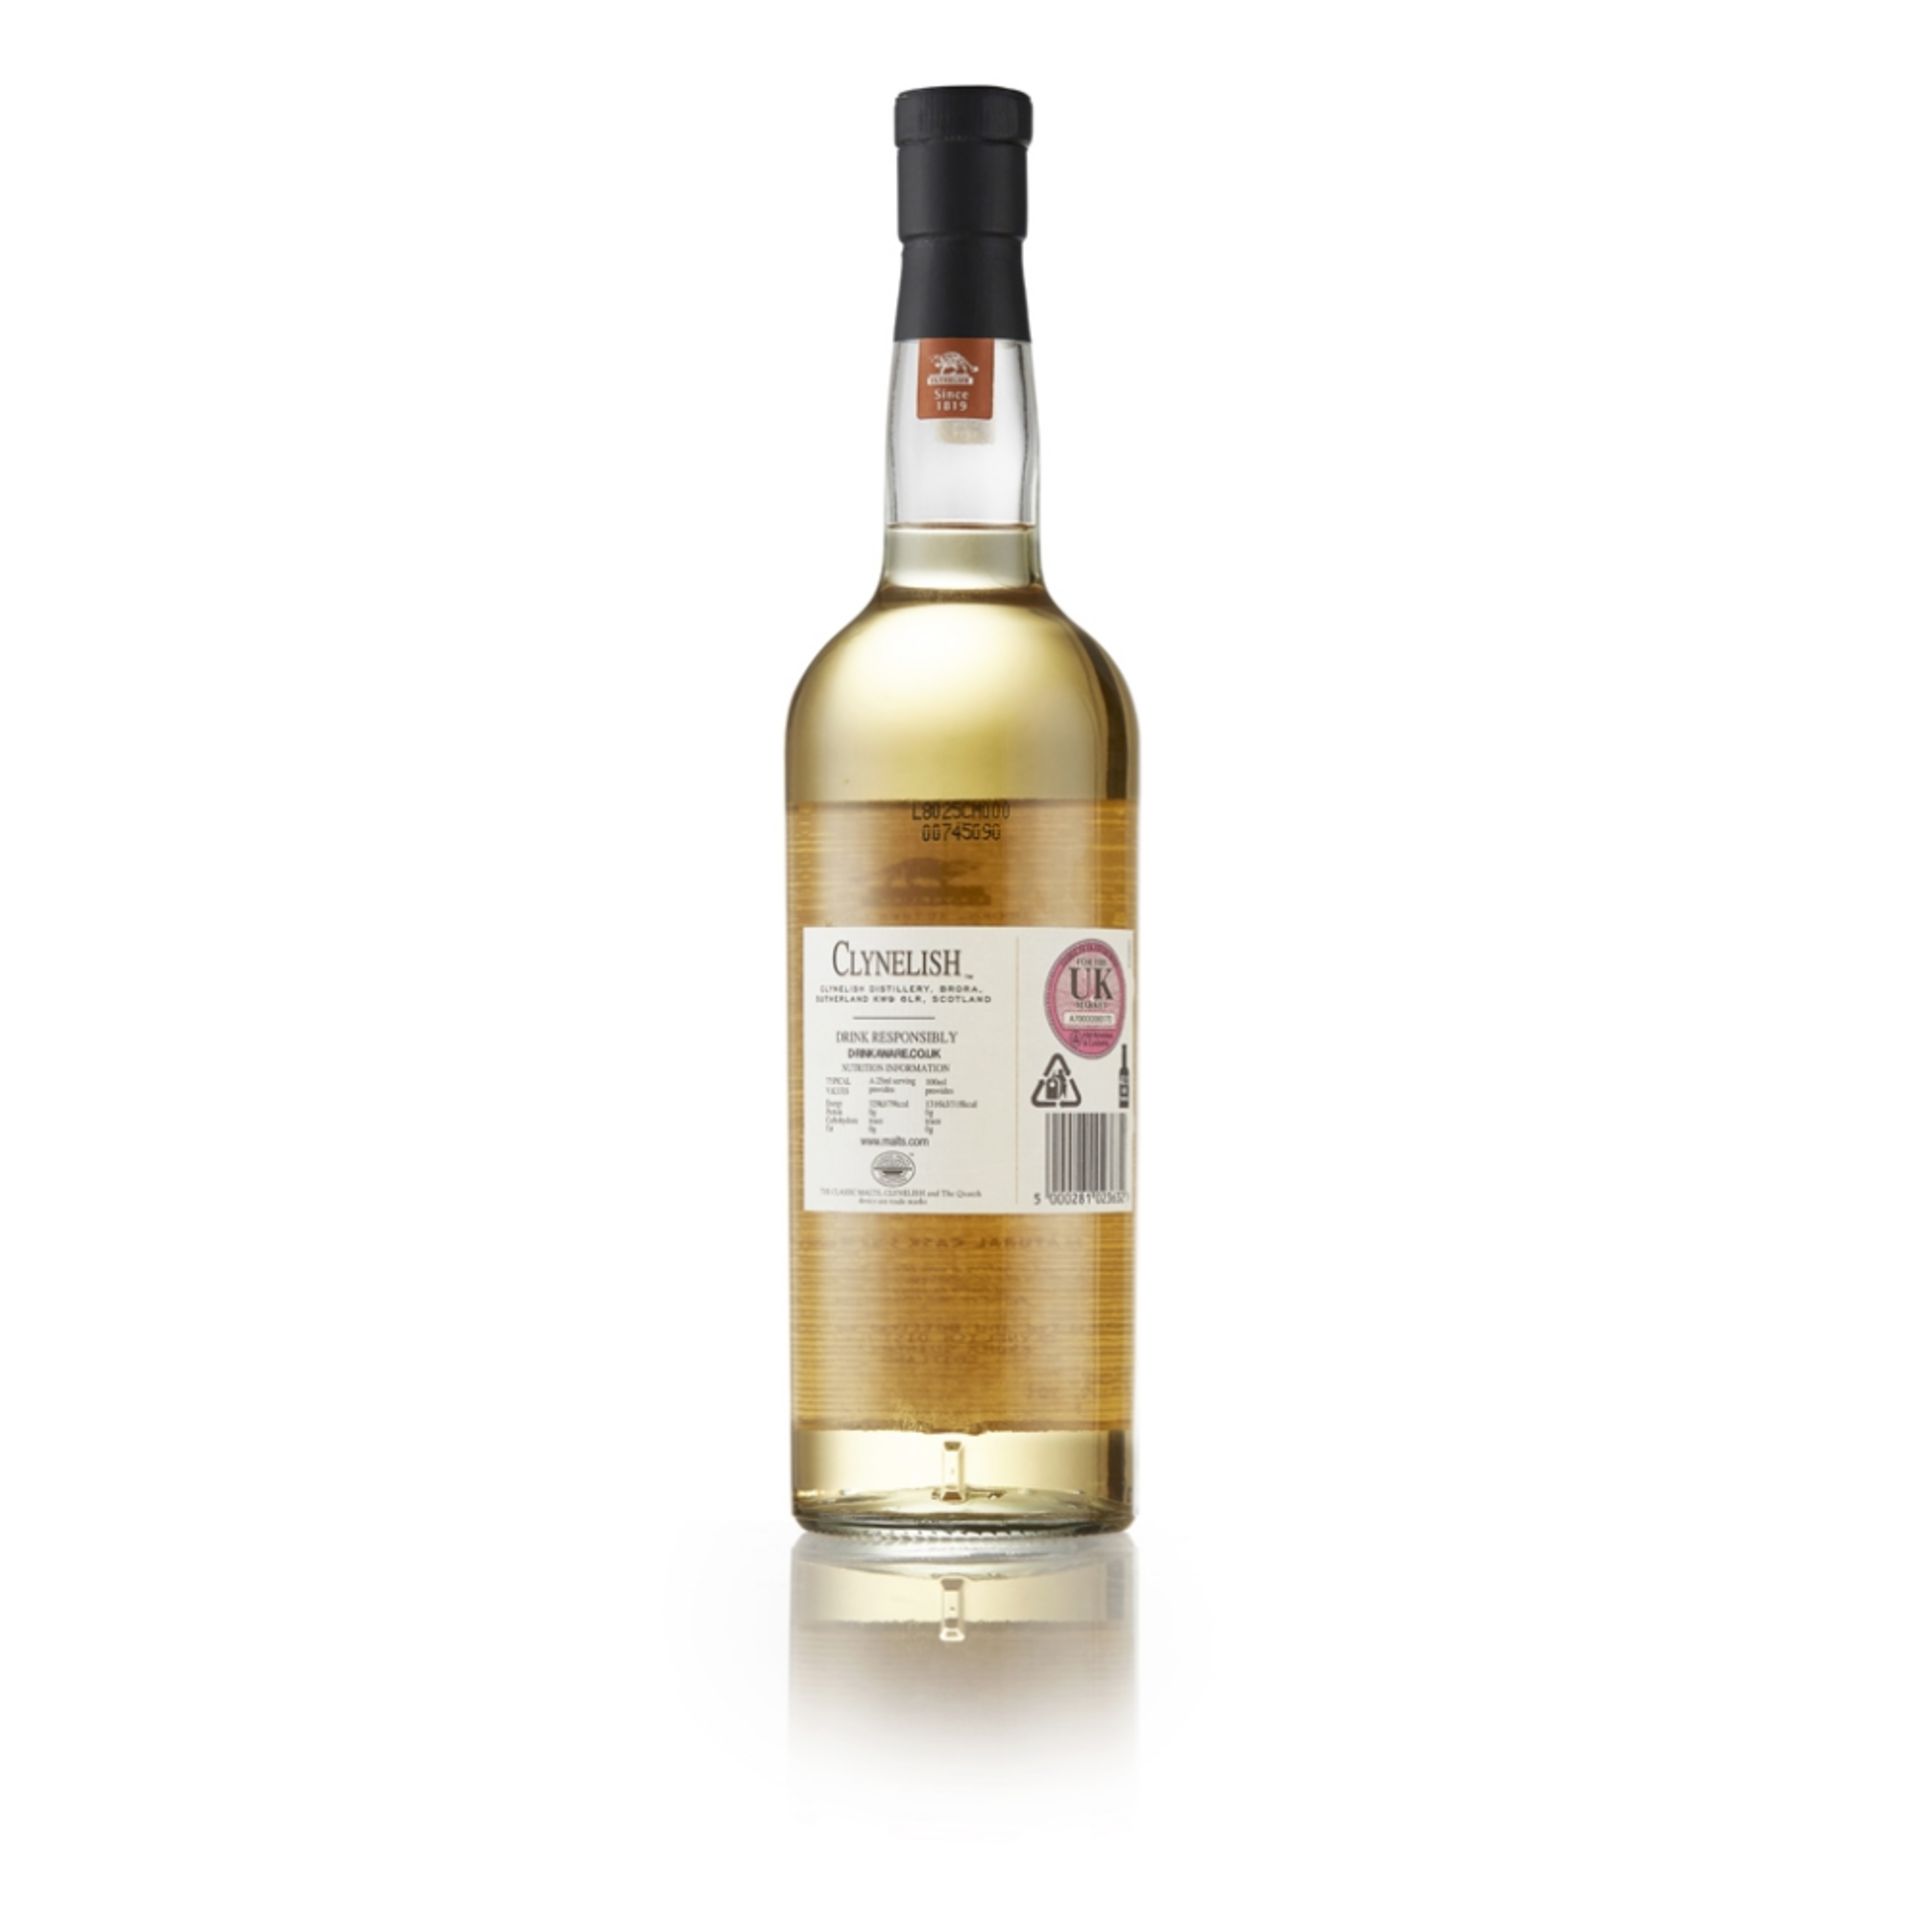 CLYNELISH DISTILLERY EXCLUSIVE bottled at natural cask strength 70cl/ 57.3% - Image 2 of 2